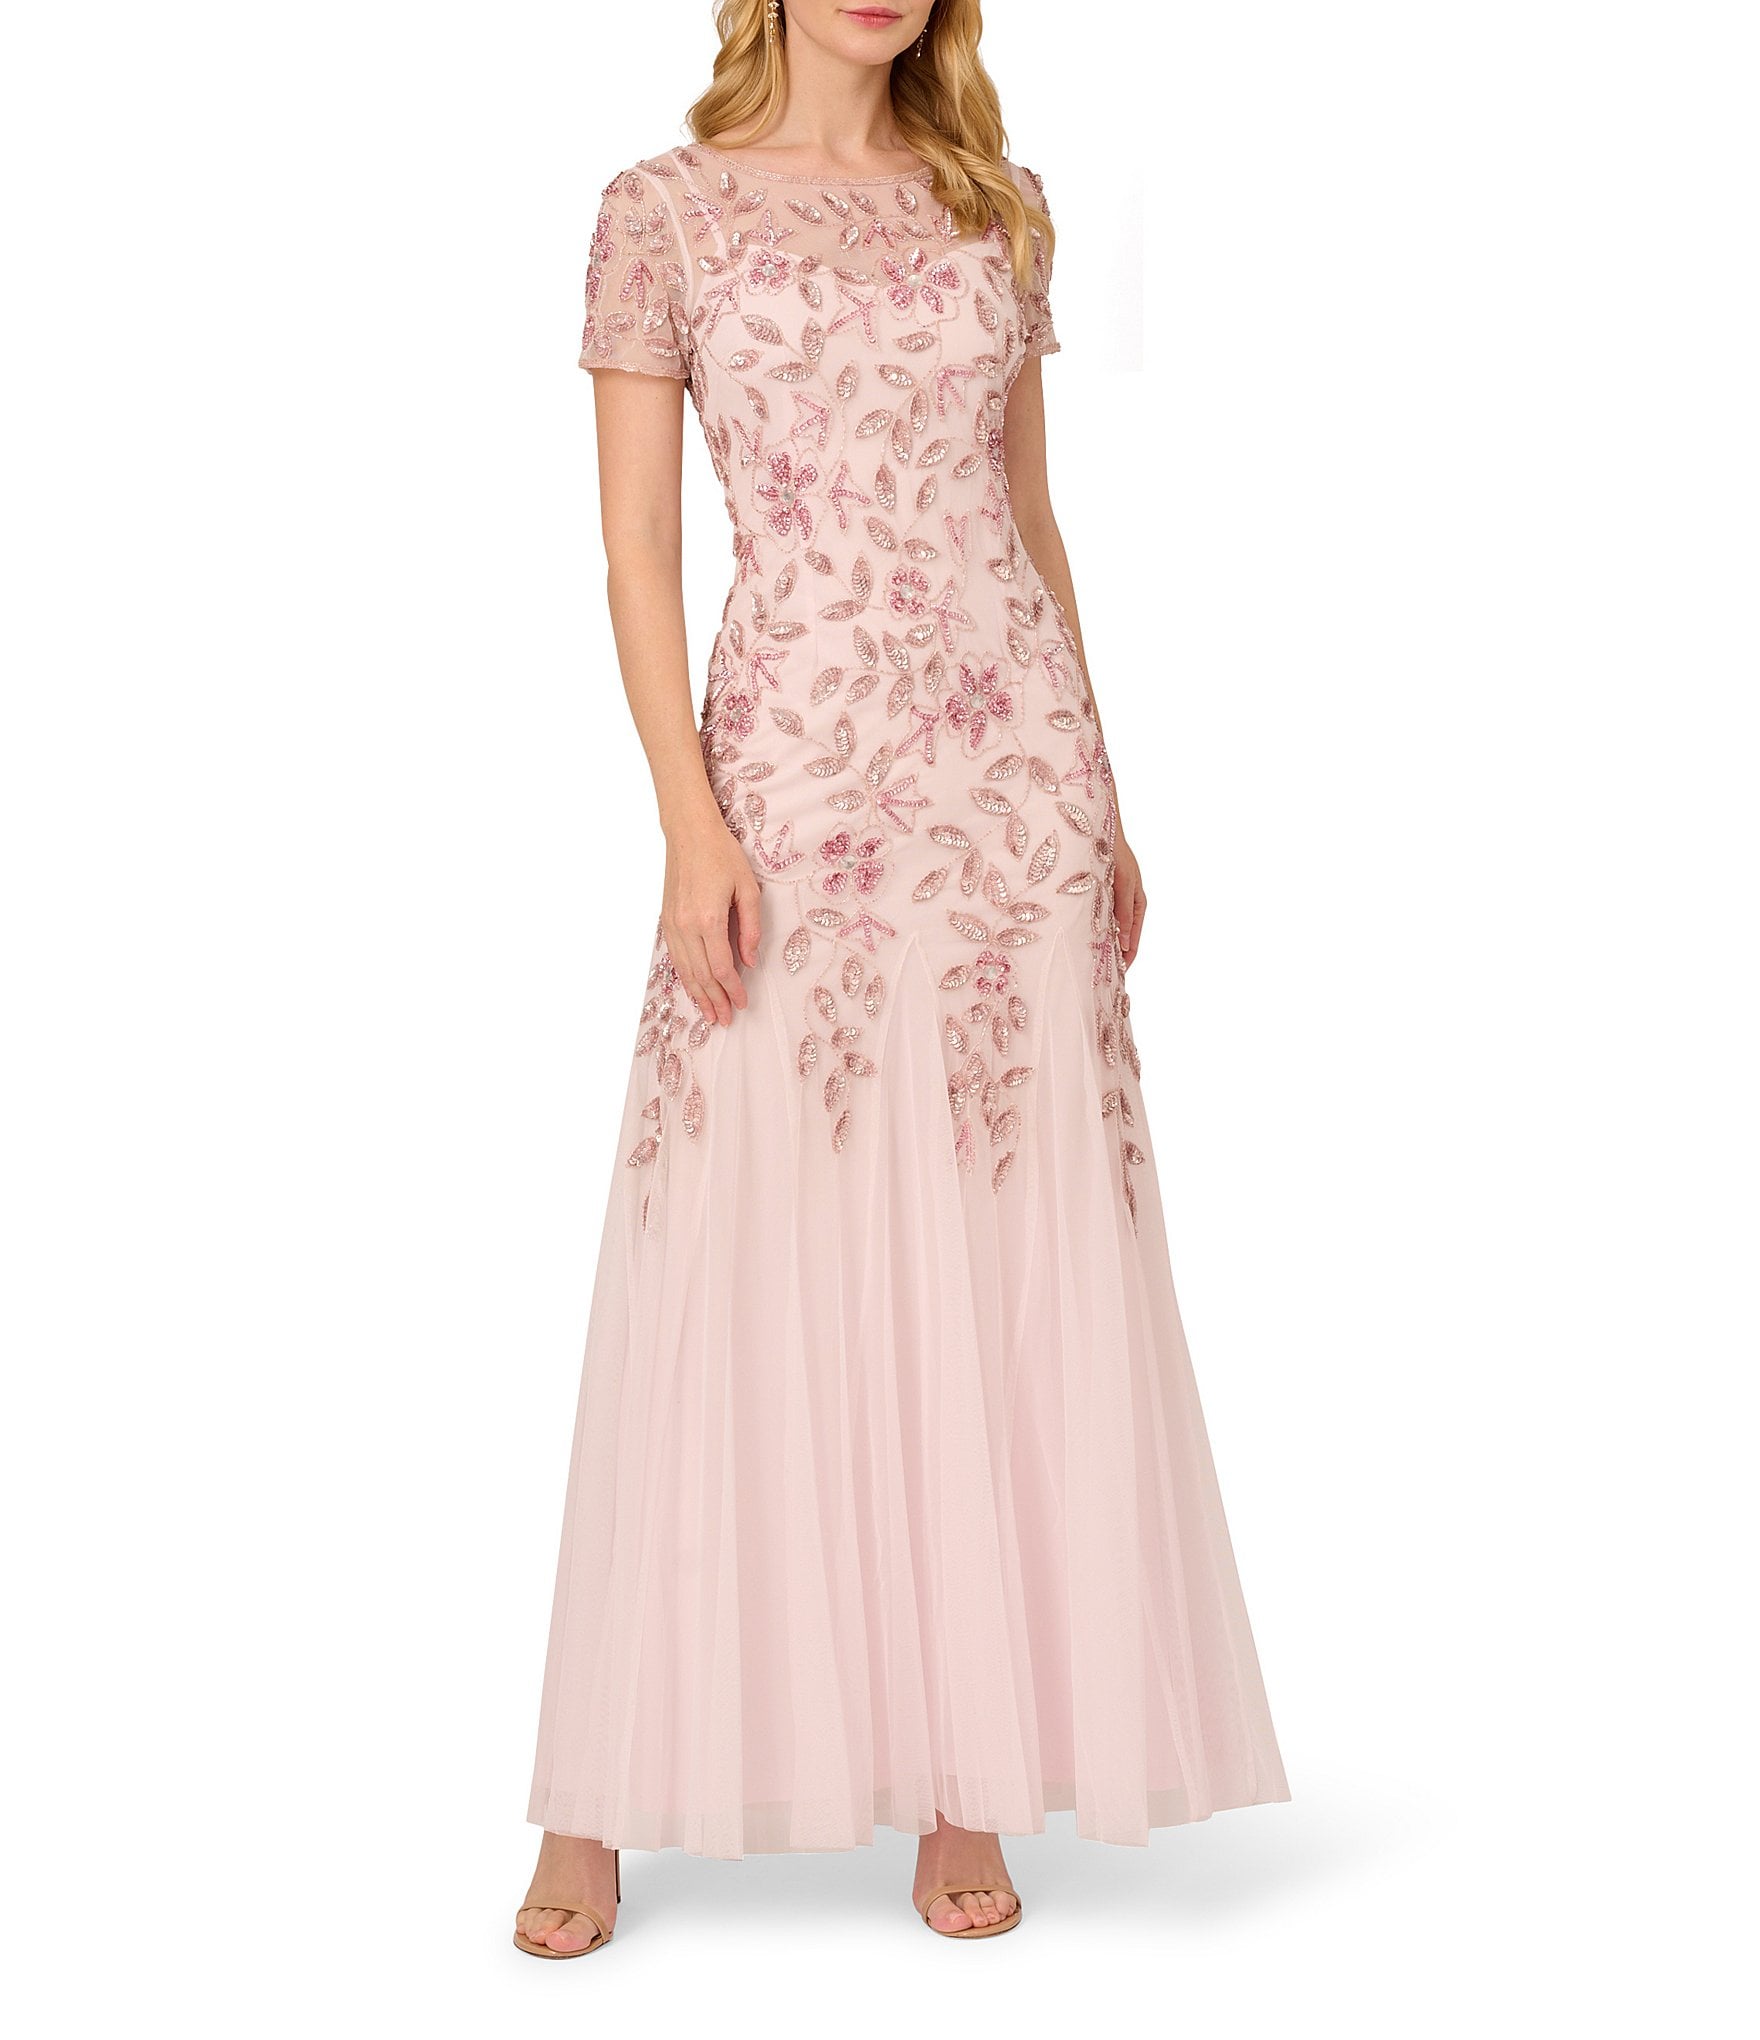 blush pink: Women's Formal Dresses & Evening Gowns